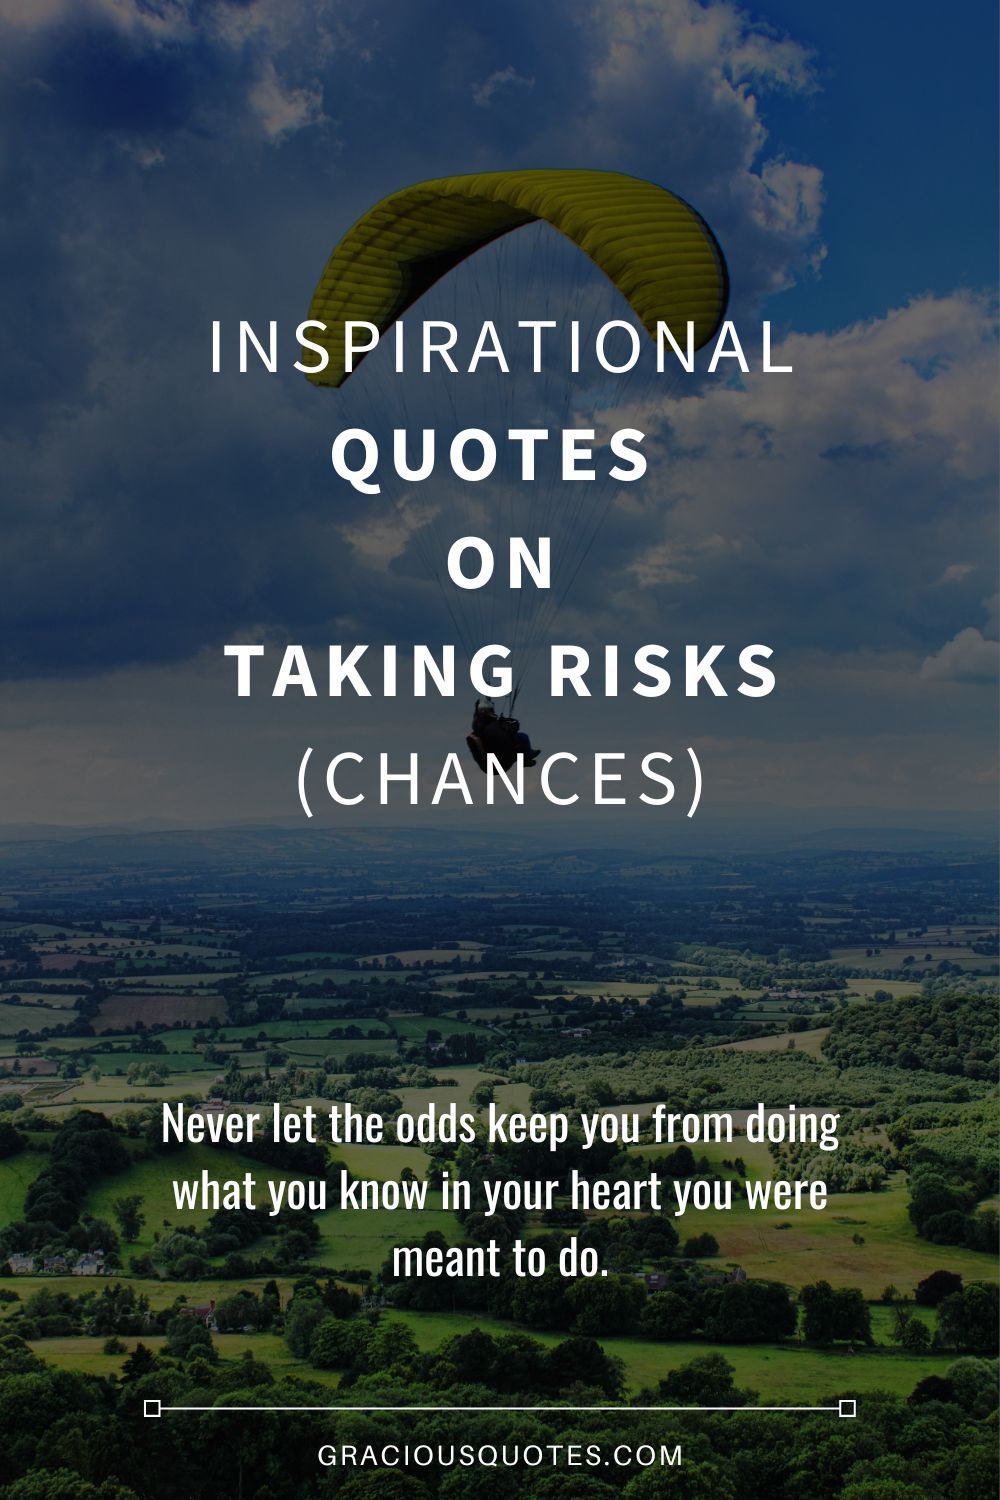 Inspirational Quotes on Taking Risks (CHANCES) - Gracious Quotes